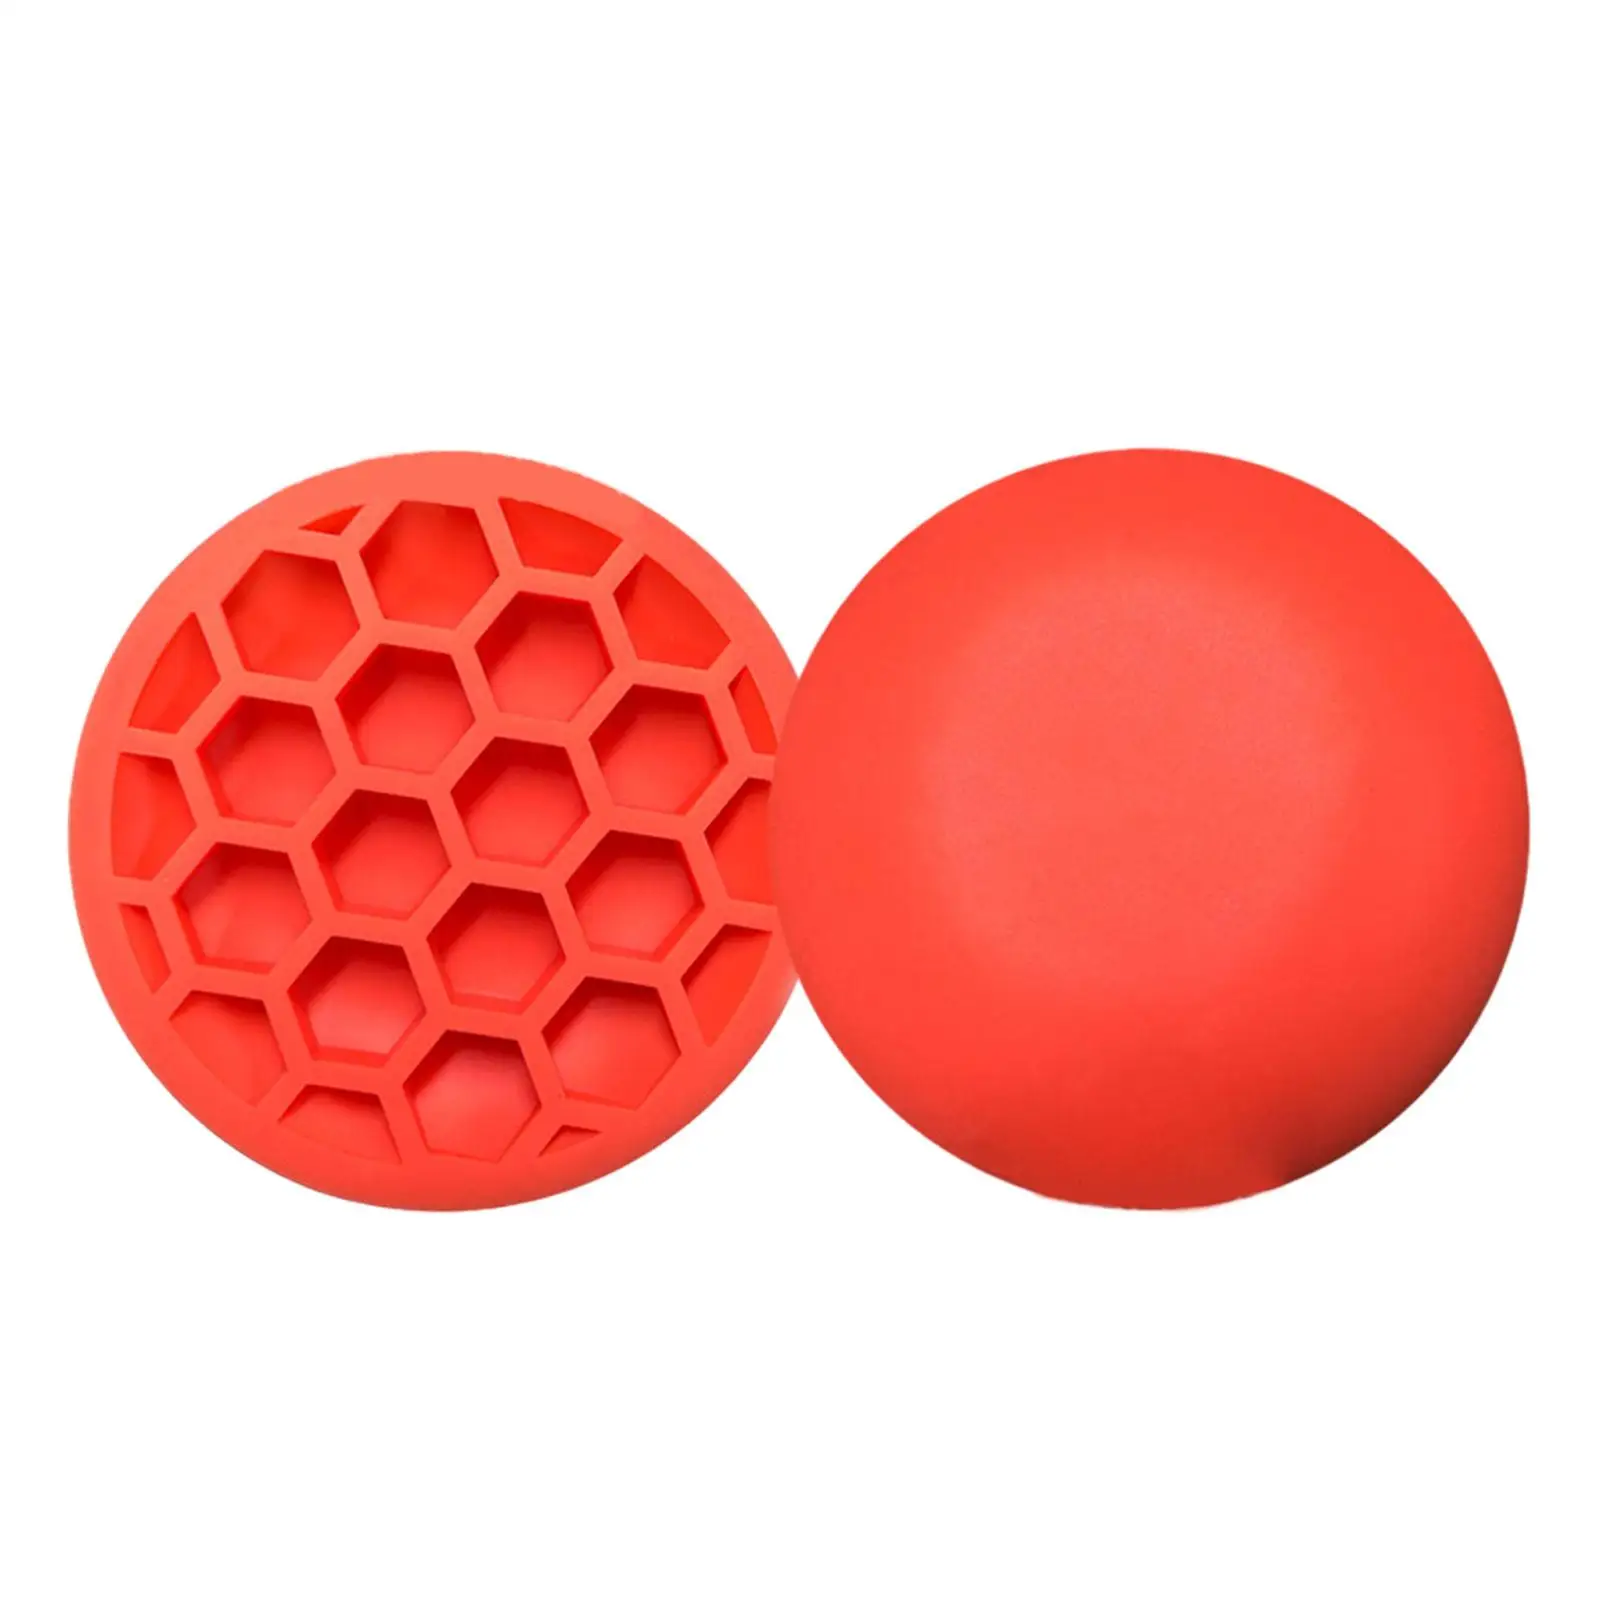 

Golf Force Plate Step Pad 1 Pair Golf Training Aid for Golf Course Professionals Starters